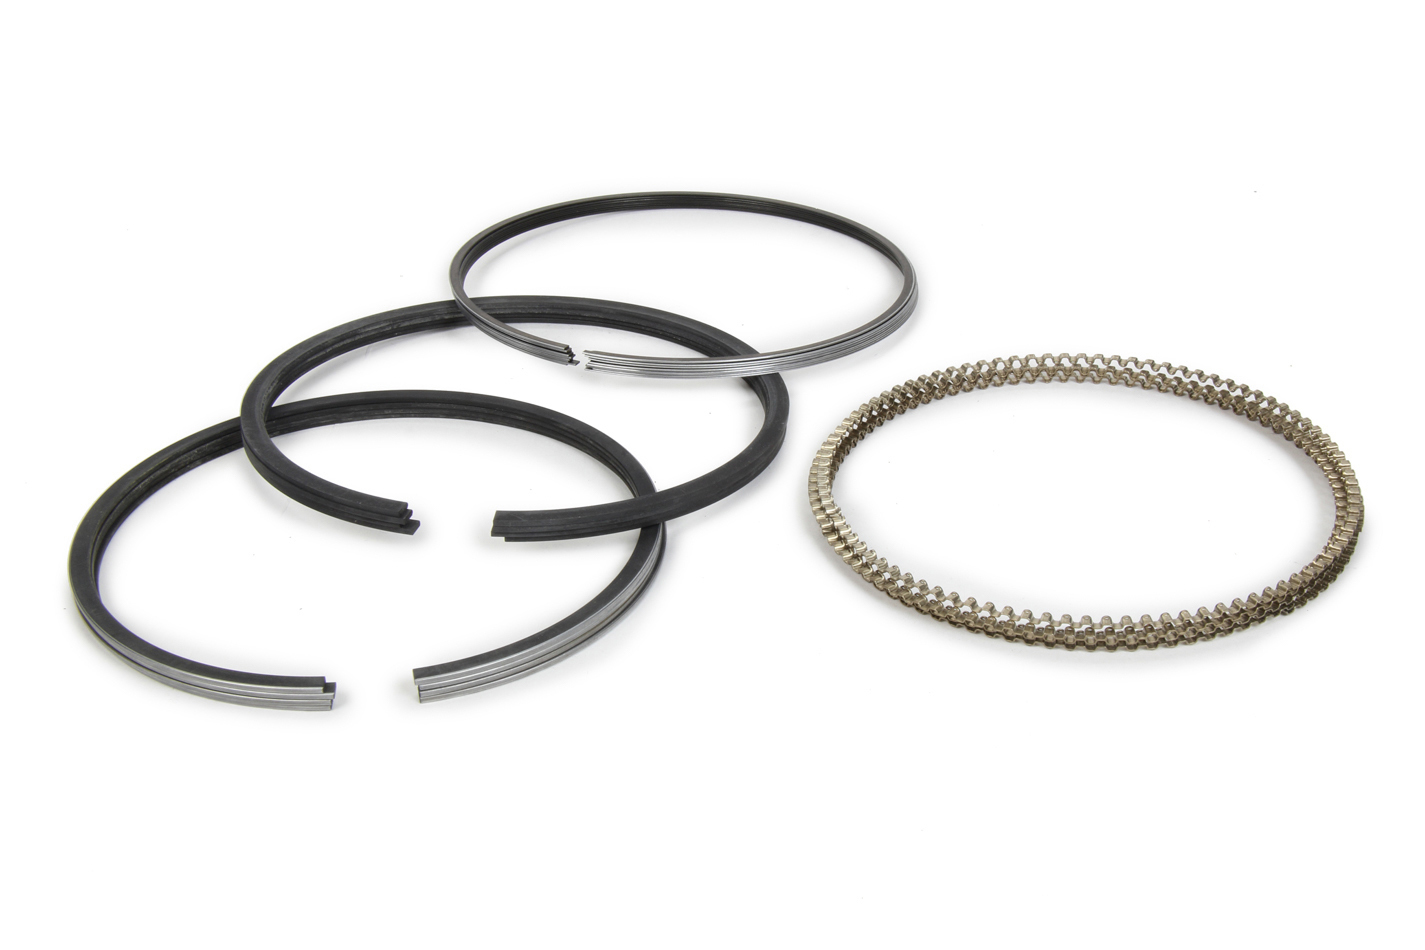 Hastings Piston Rings 2C4651 Piston Rings, 3.268 in Bore, Drop In, 1.5 x 1.5 x 3.0 mm Thick, Standard Tension, Ductile Iron, Chrome, 4-Cylinder, Kit